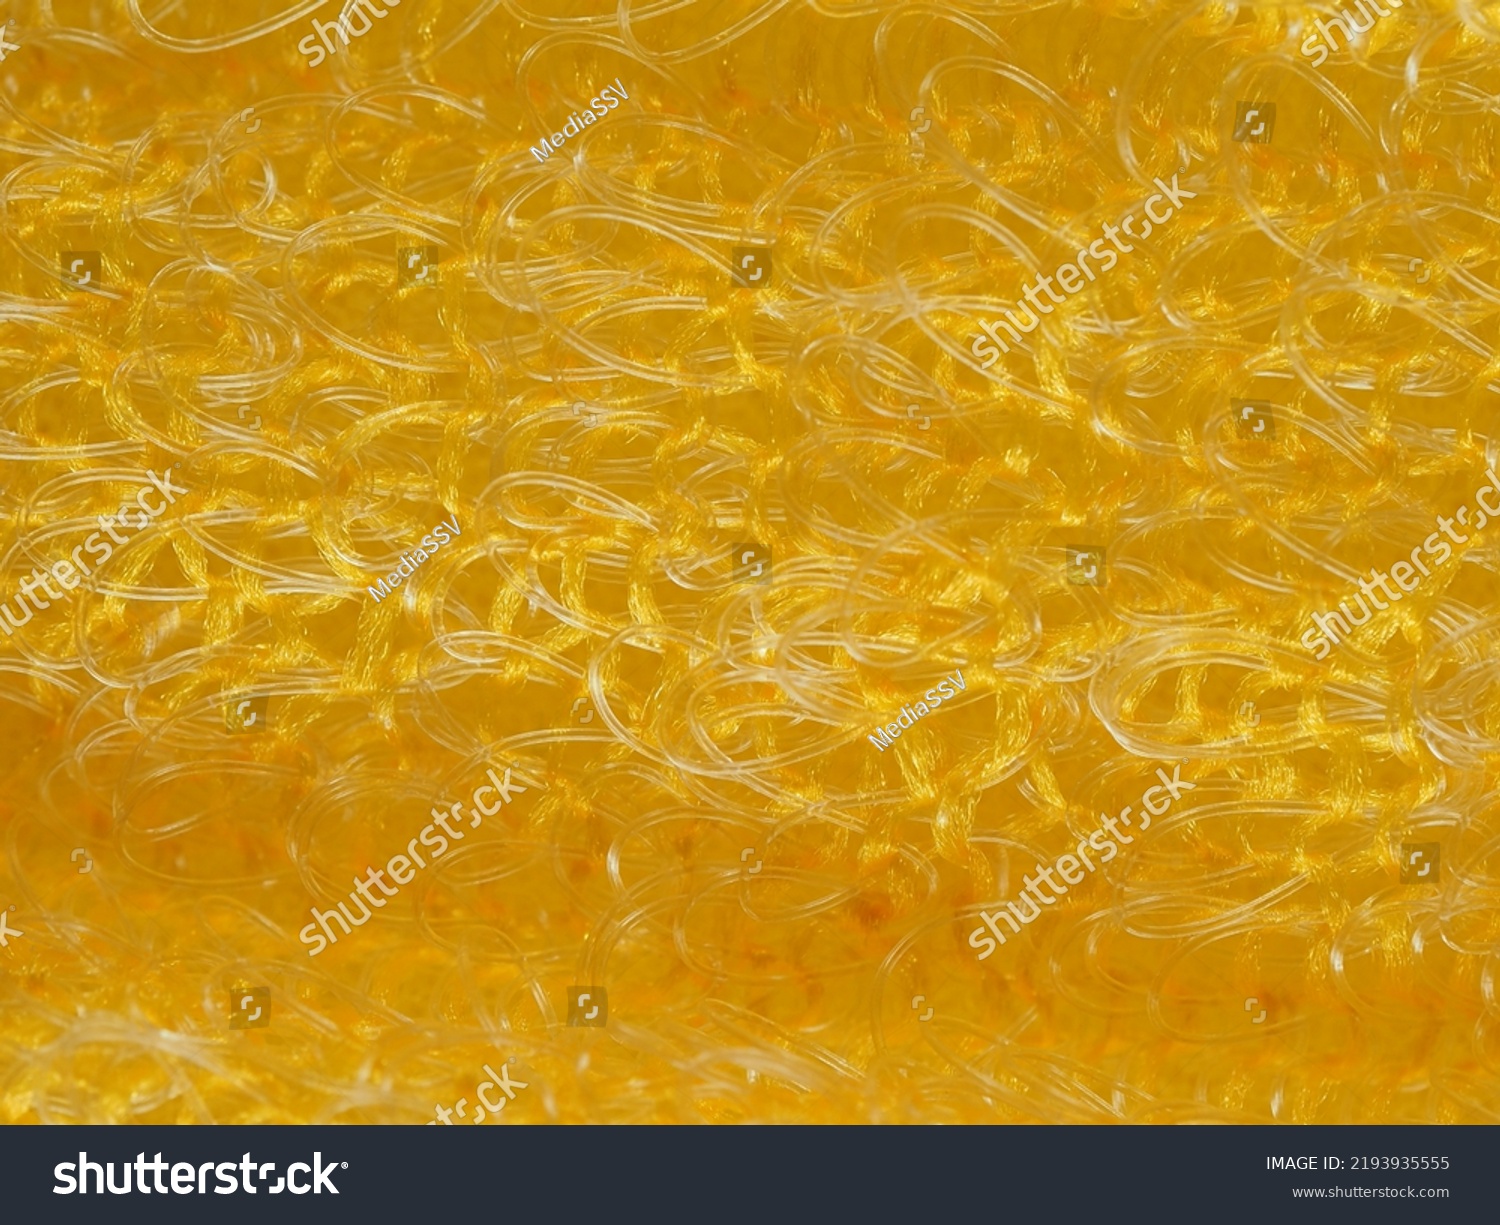 close up, background, texture, large horizontal banner. heterogeneous surface structure bright saturated yellow sponge for washing dishes, kitchen, bath. full depth of field. high resolution photo #2193935555